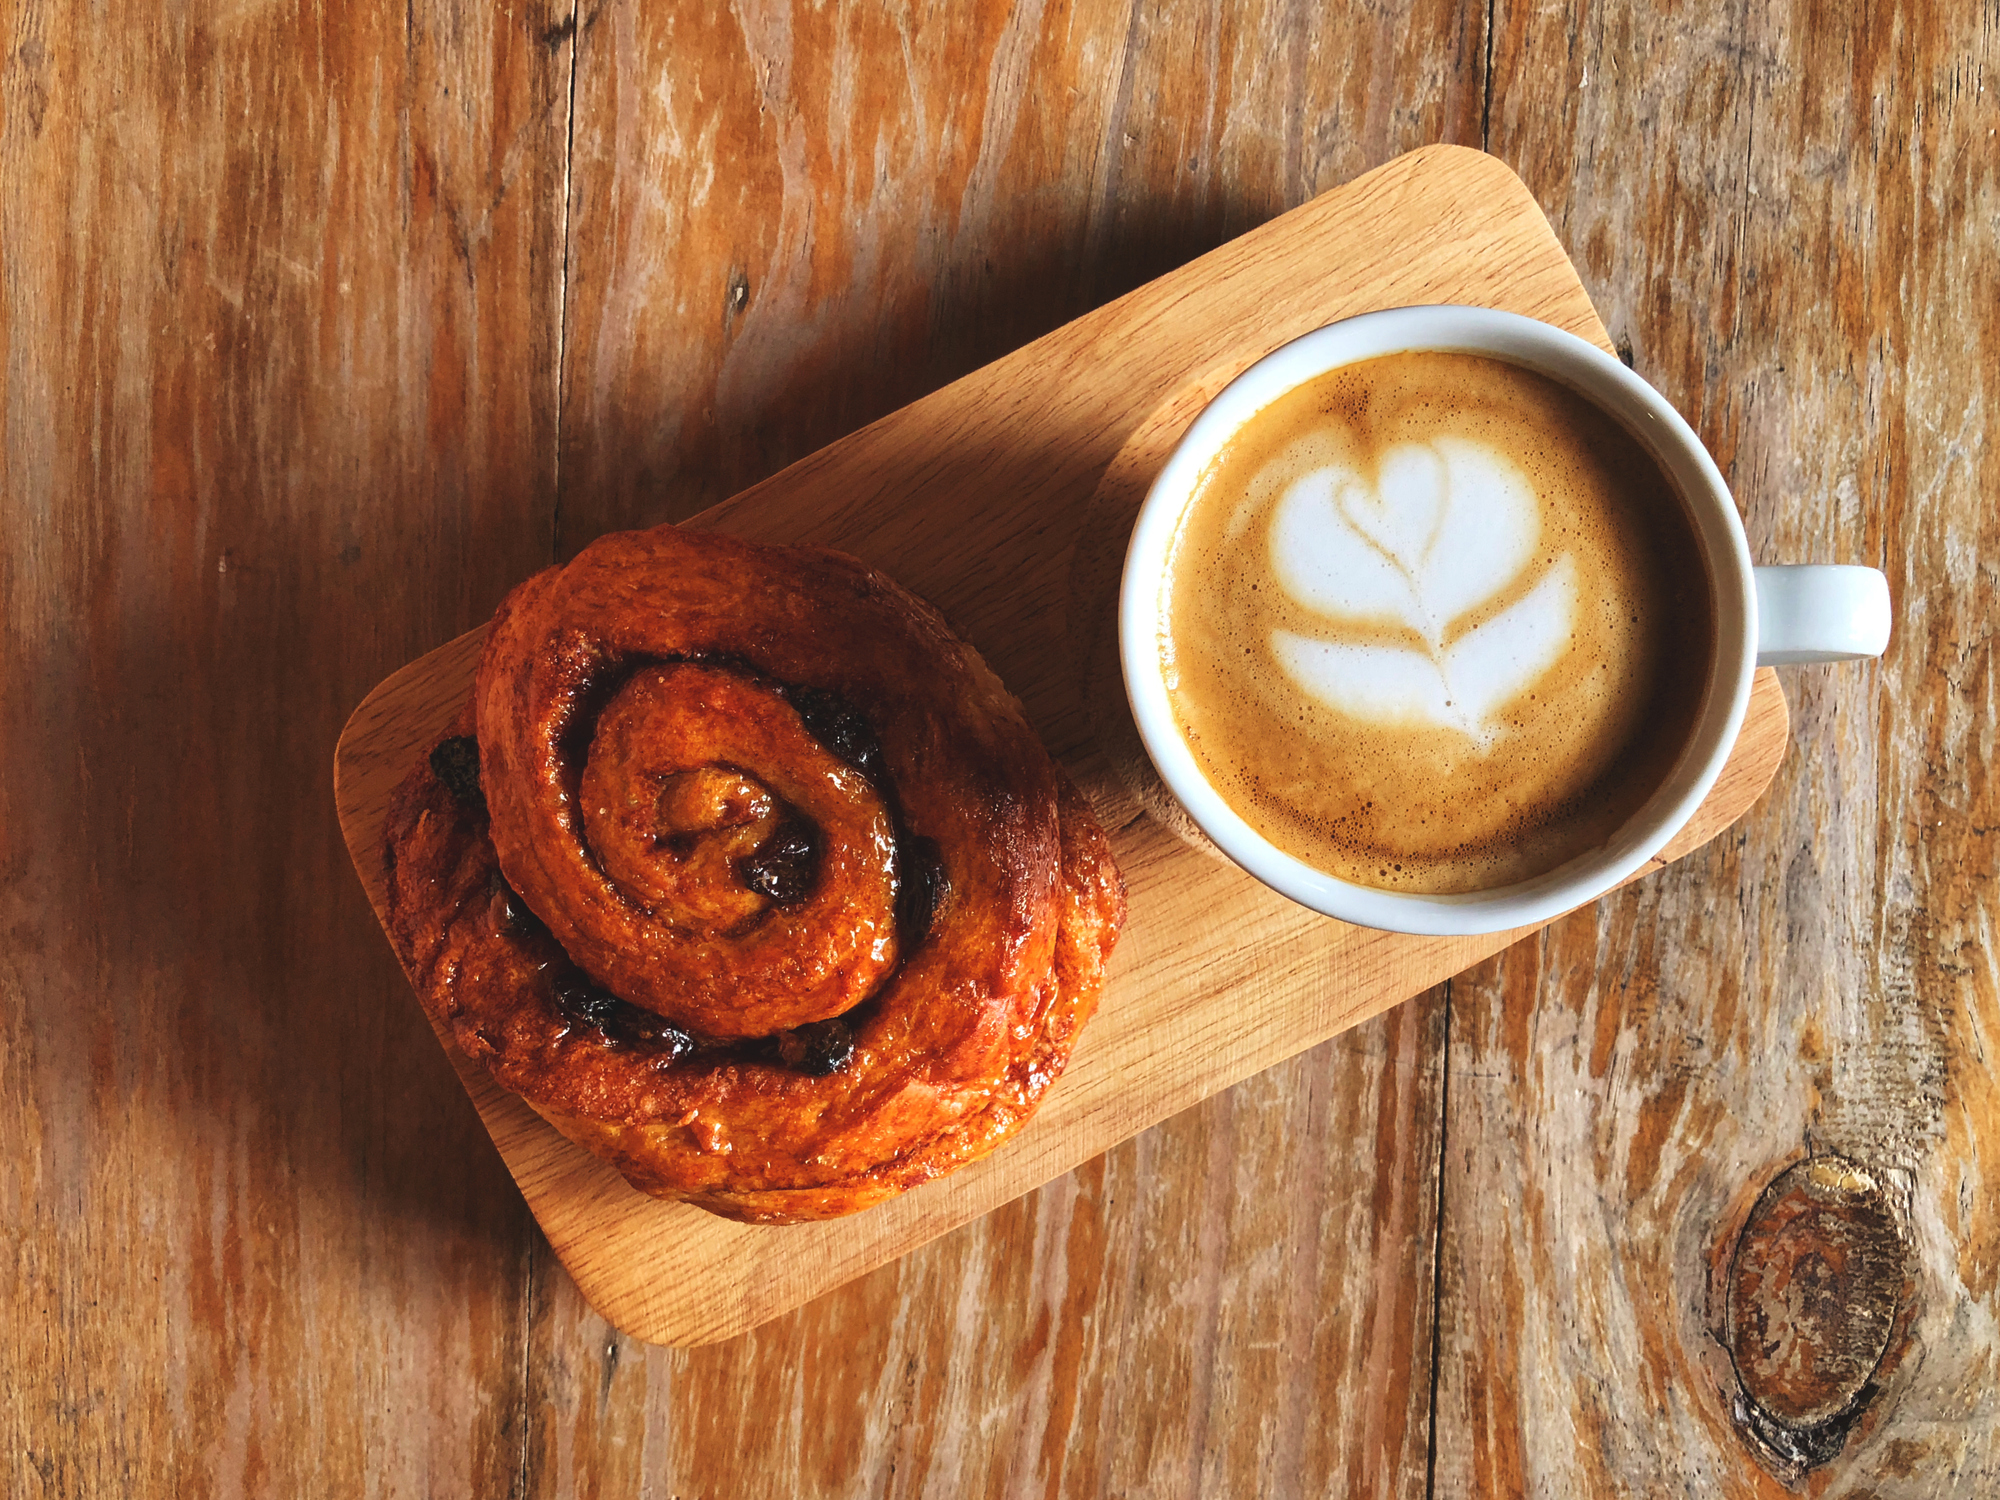 How to Make a Cinnamon Roll Cappuccino